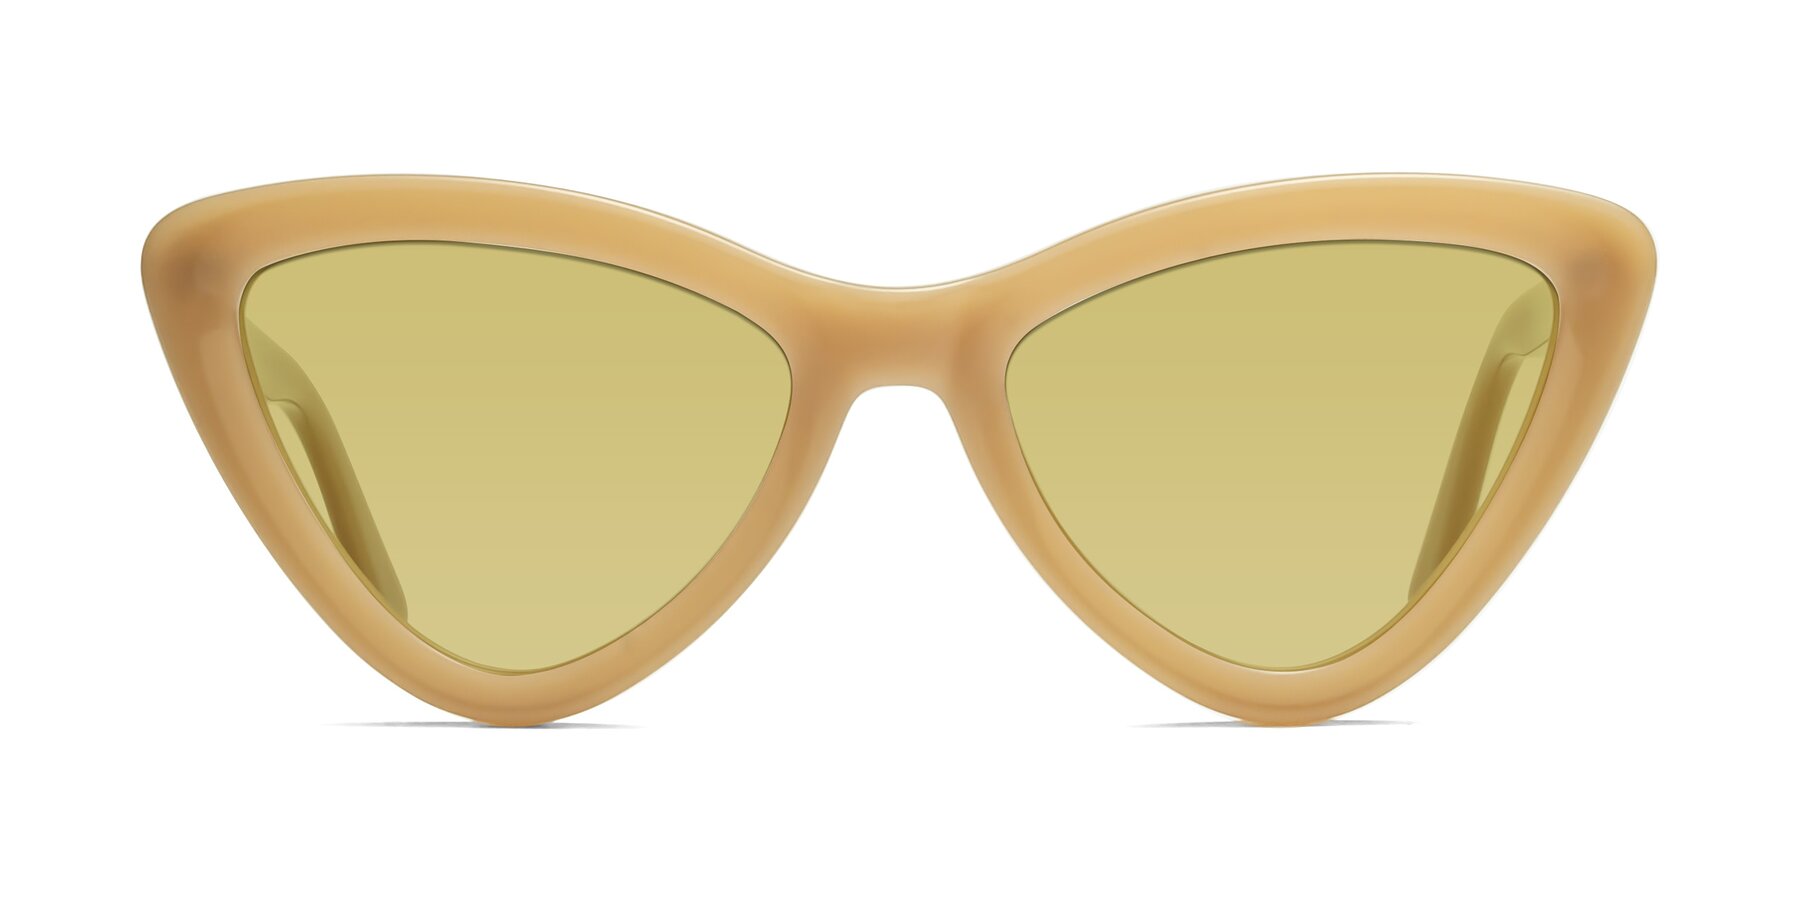 Candy - Brown Sunglasses